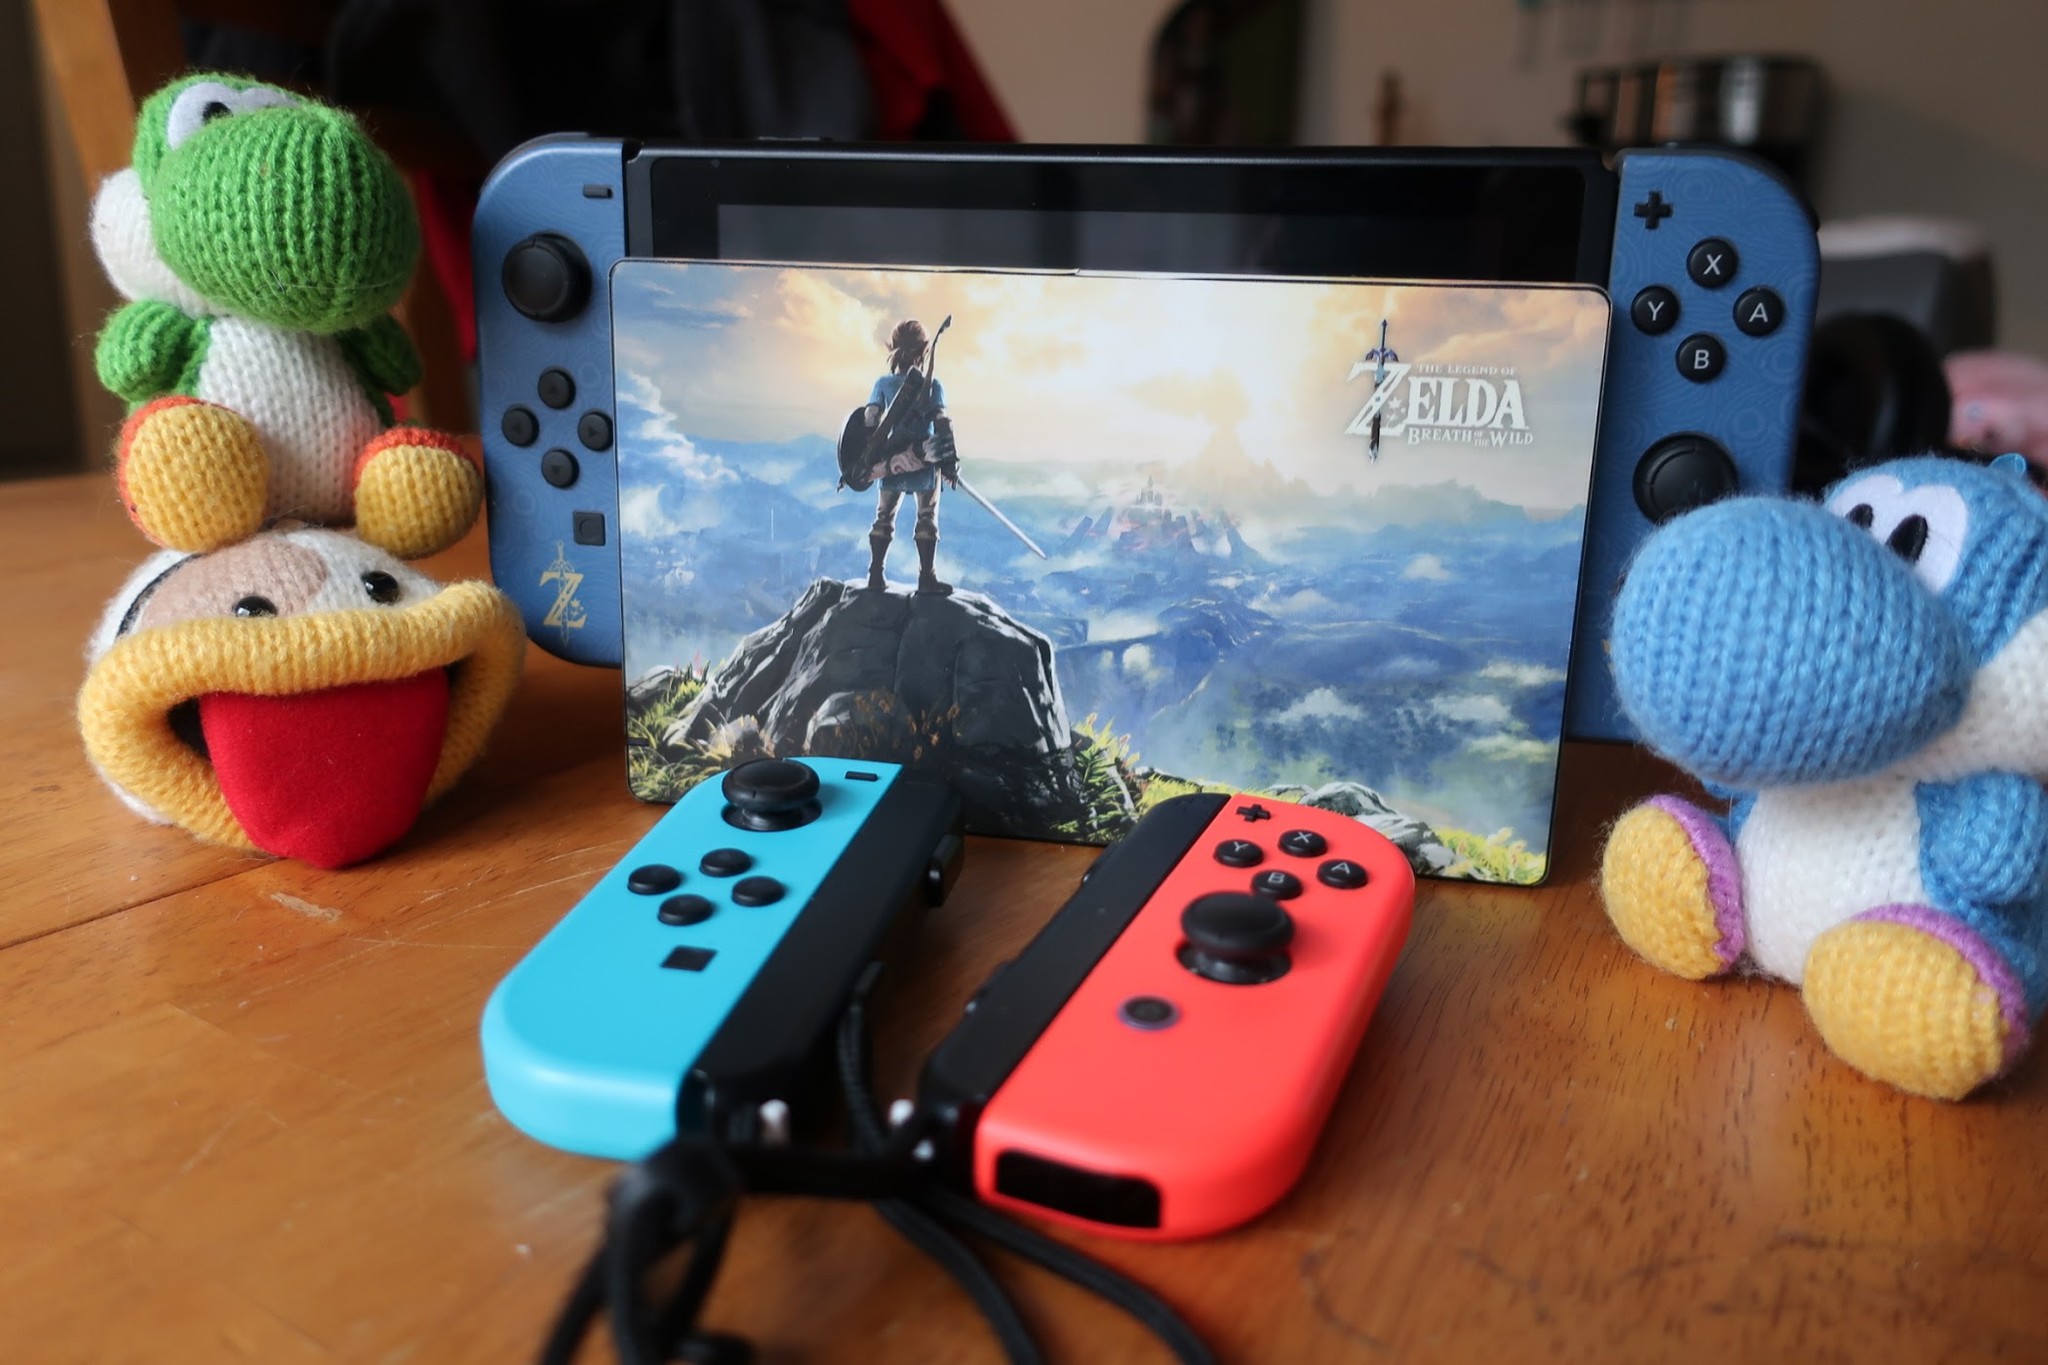 bølge renæssance moderat 6 Wii U games that need to come to the Nintendo Switch ASAP | iMore